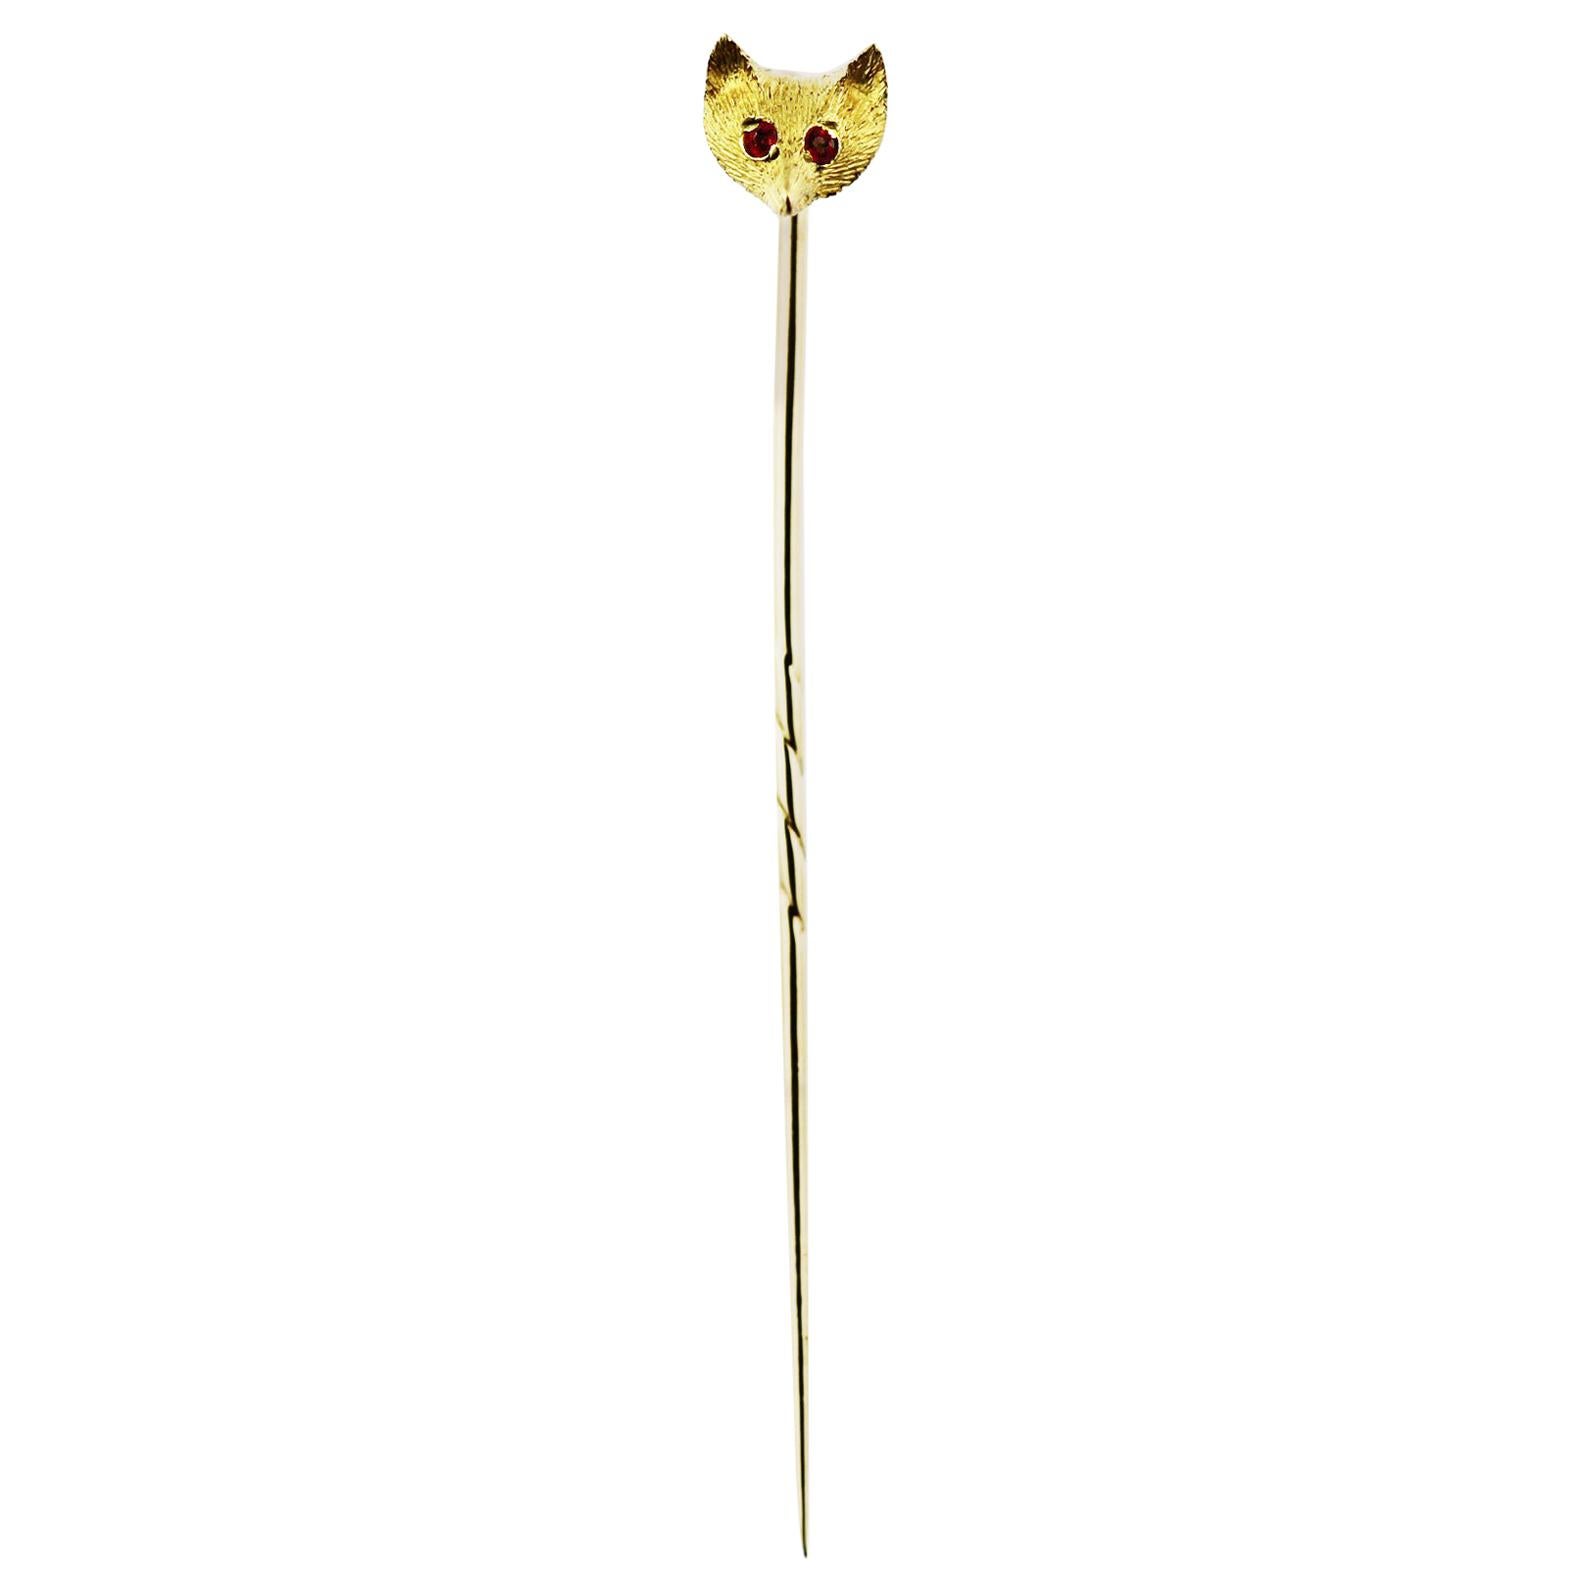 Vintage Stick/Tie Pin, Fox Head with Ruby Eyes set in 9 Carat Yellow Gold